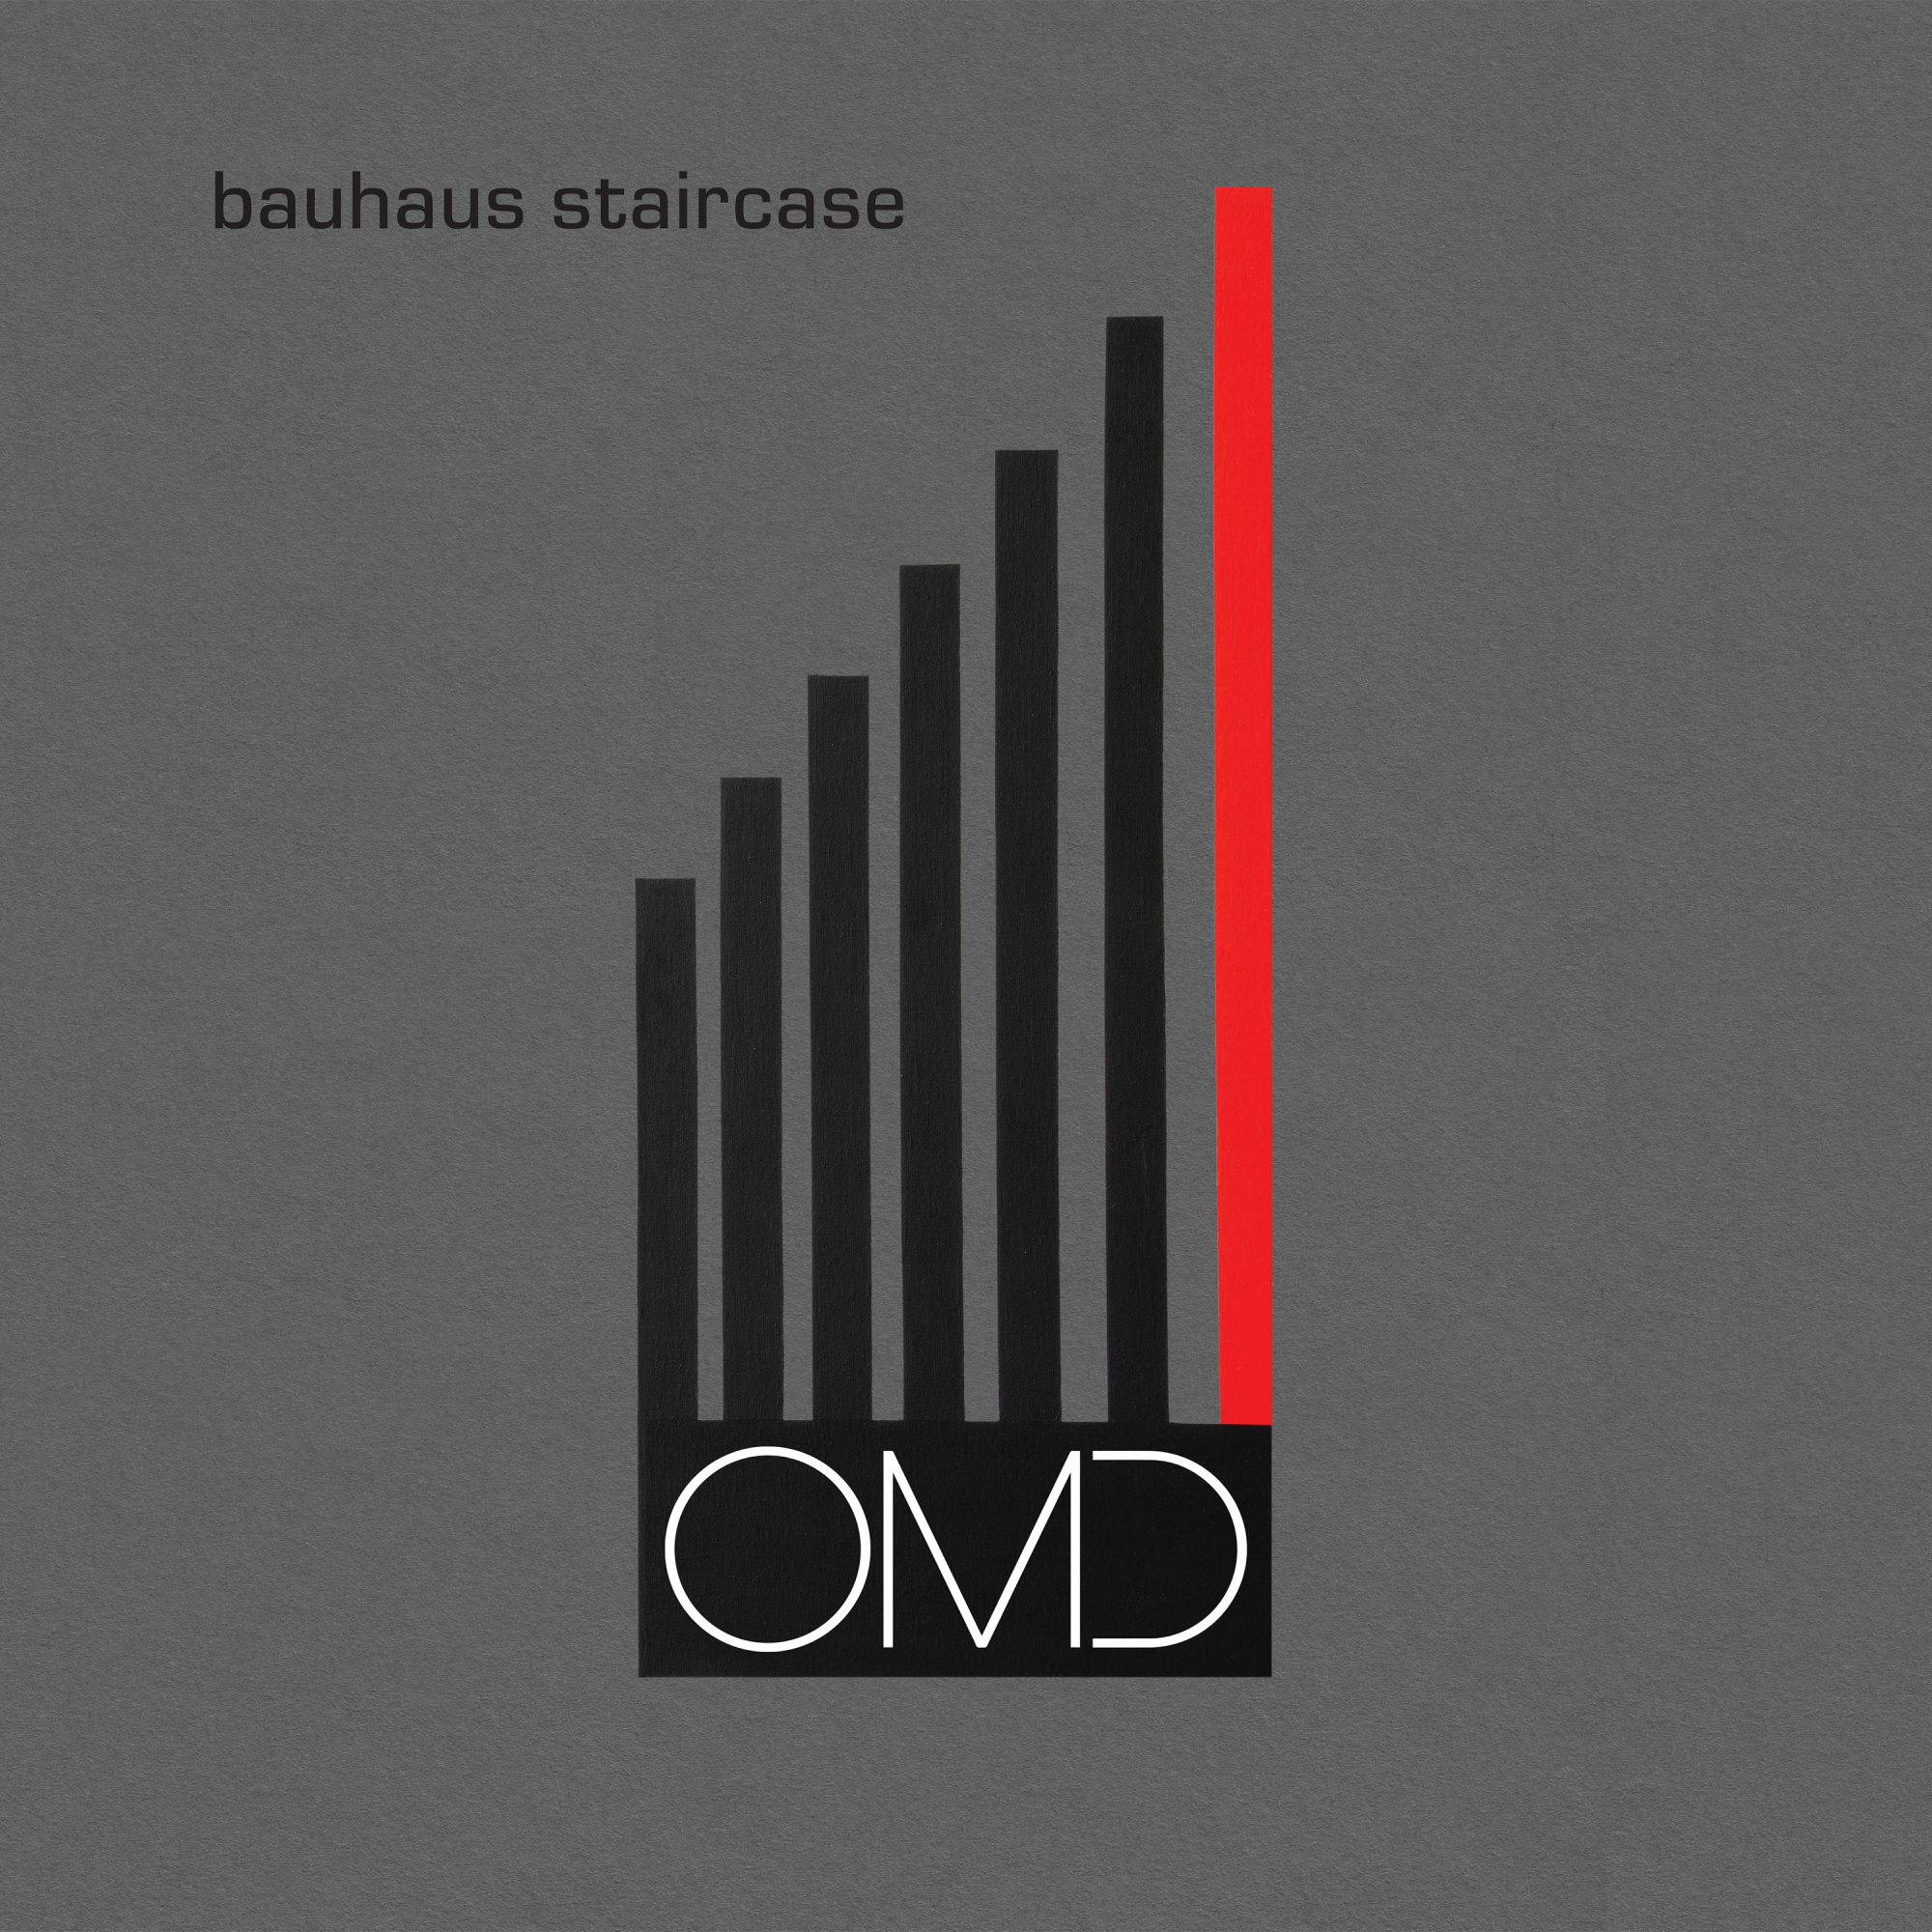 Bauhaus Staircase: Exclusive Silver Vinyl LP + Limited Spot UV Print [Numbered]